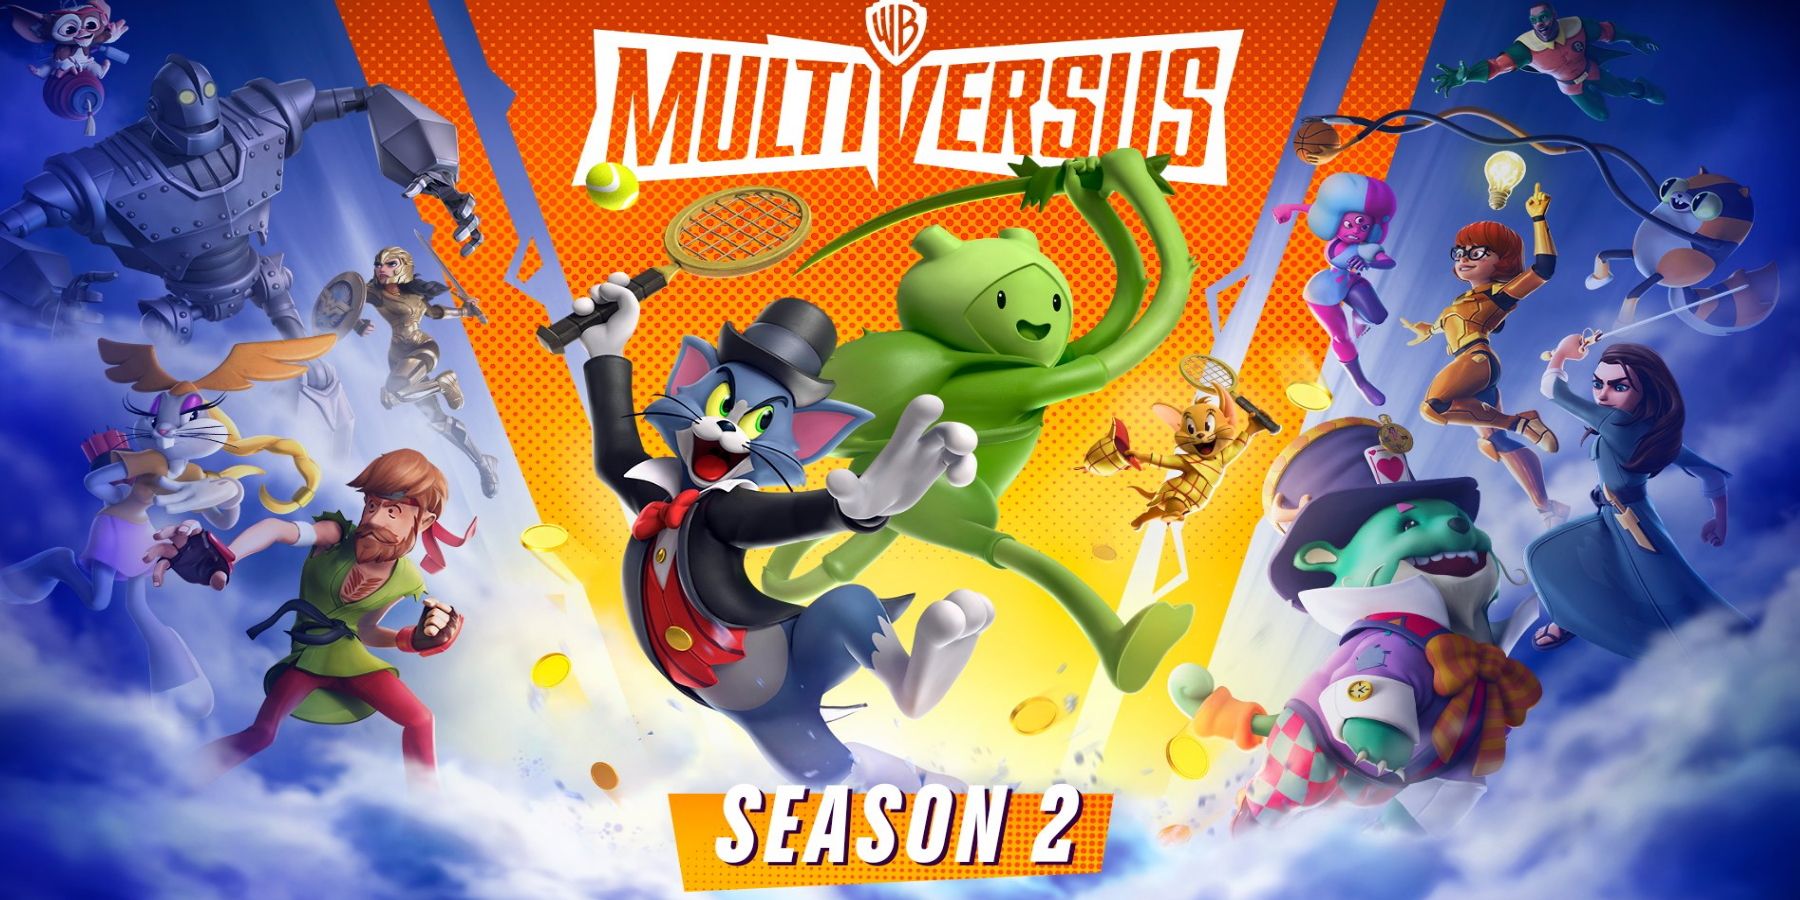 10 Cartoon Network Shows That Should Be Represented in Multiversus